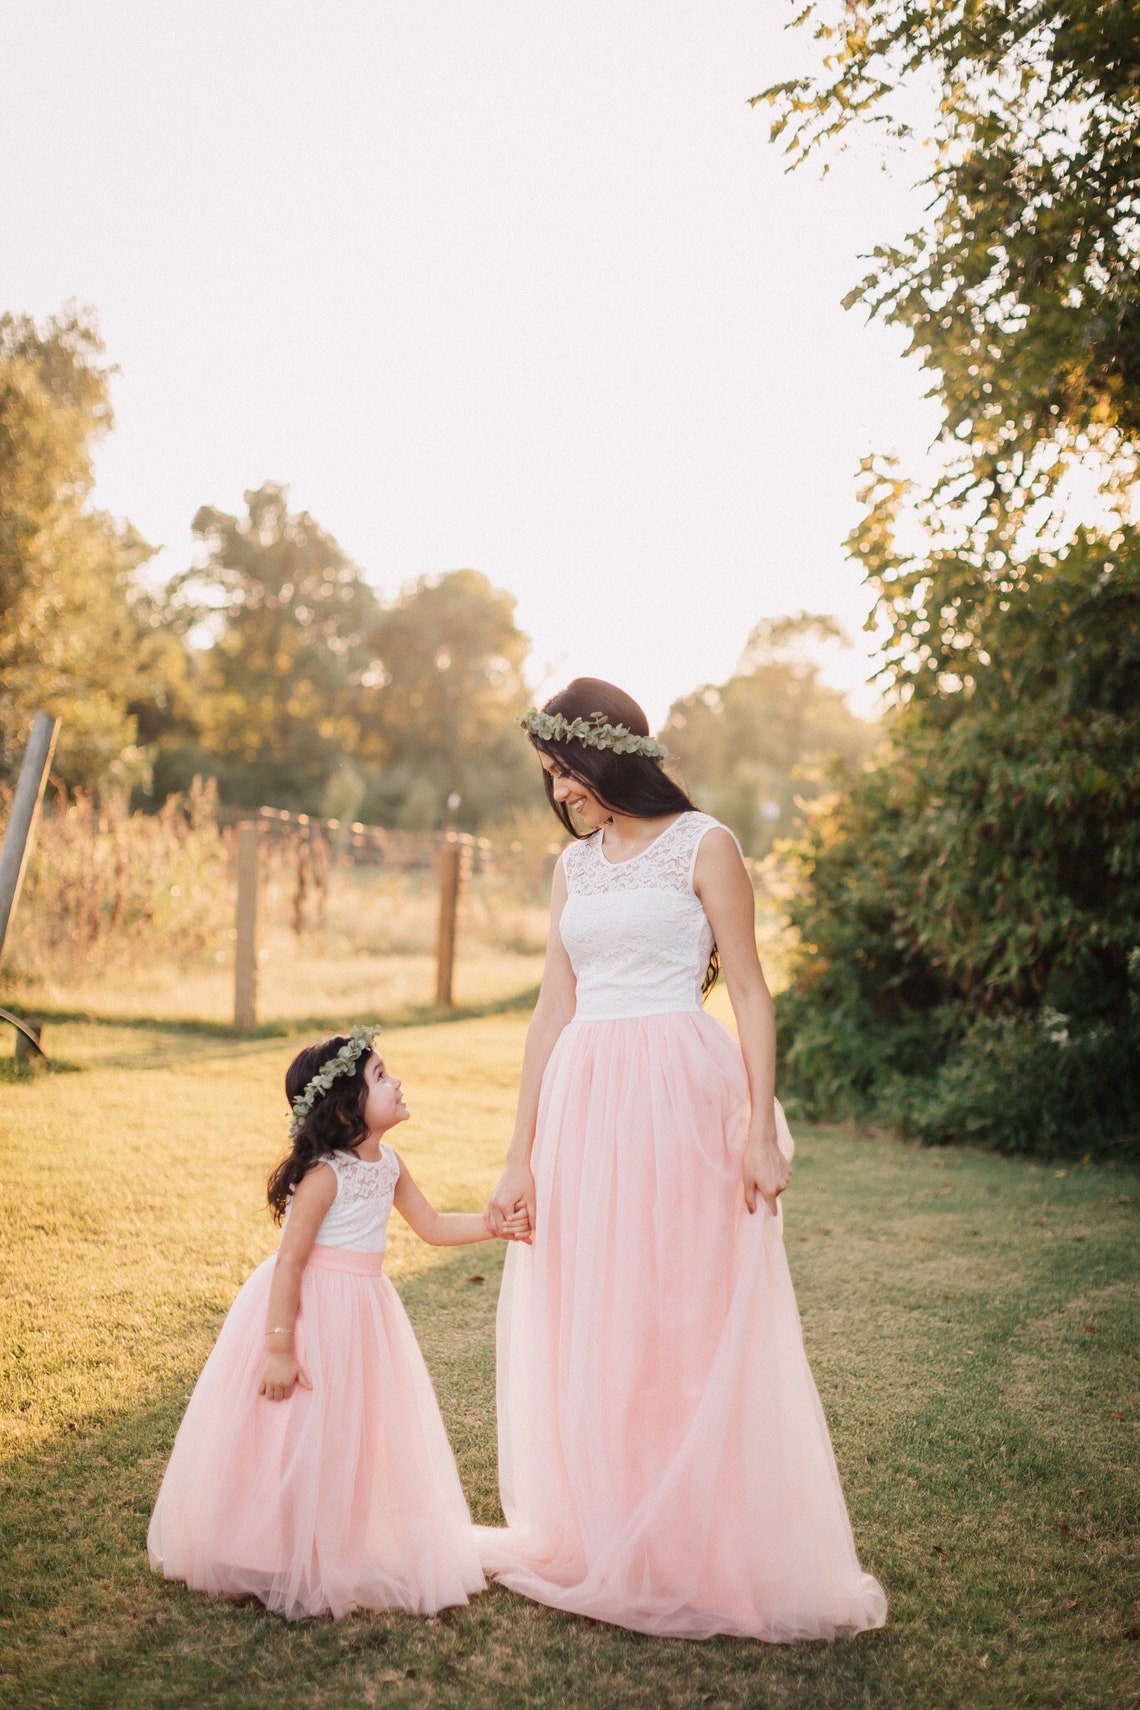 Blush pink Mother Daughter Matching Tutu Lace Dresses Tulle | Etsy